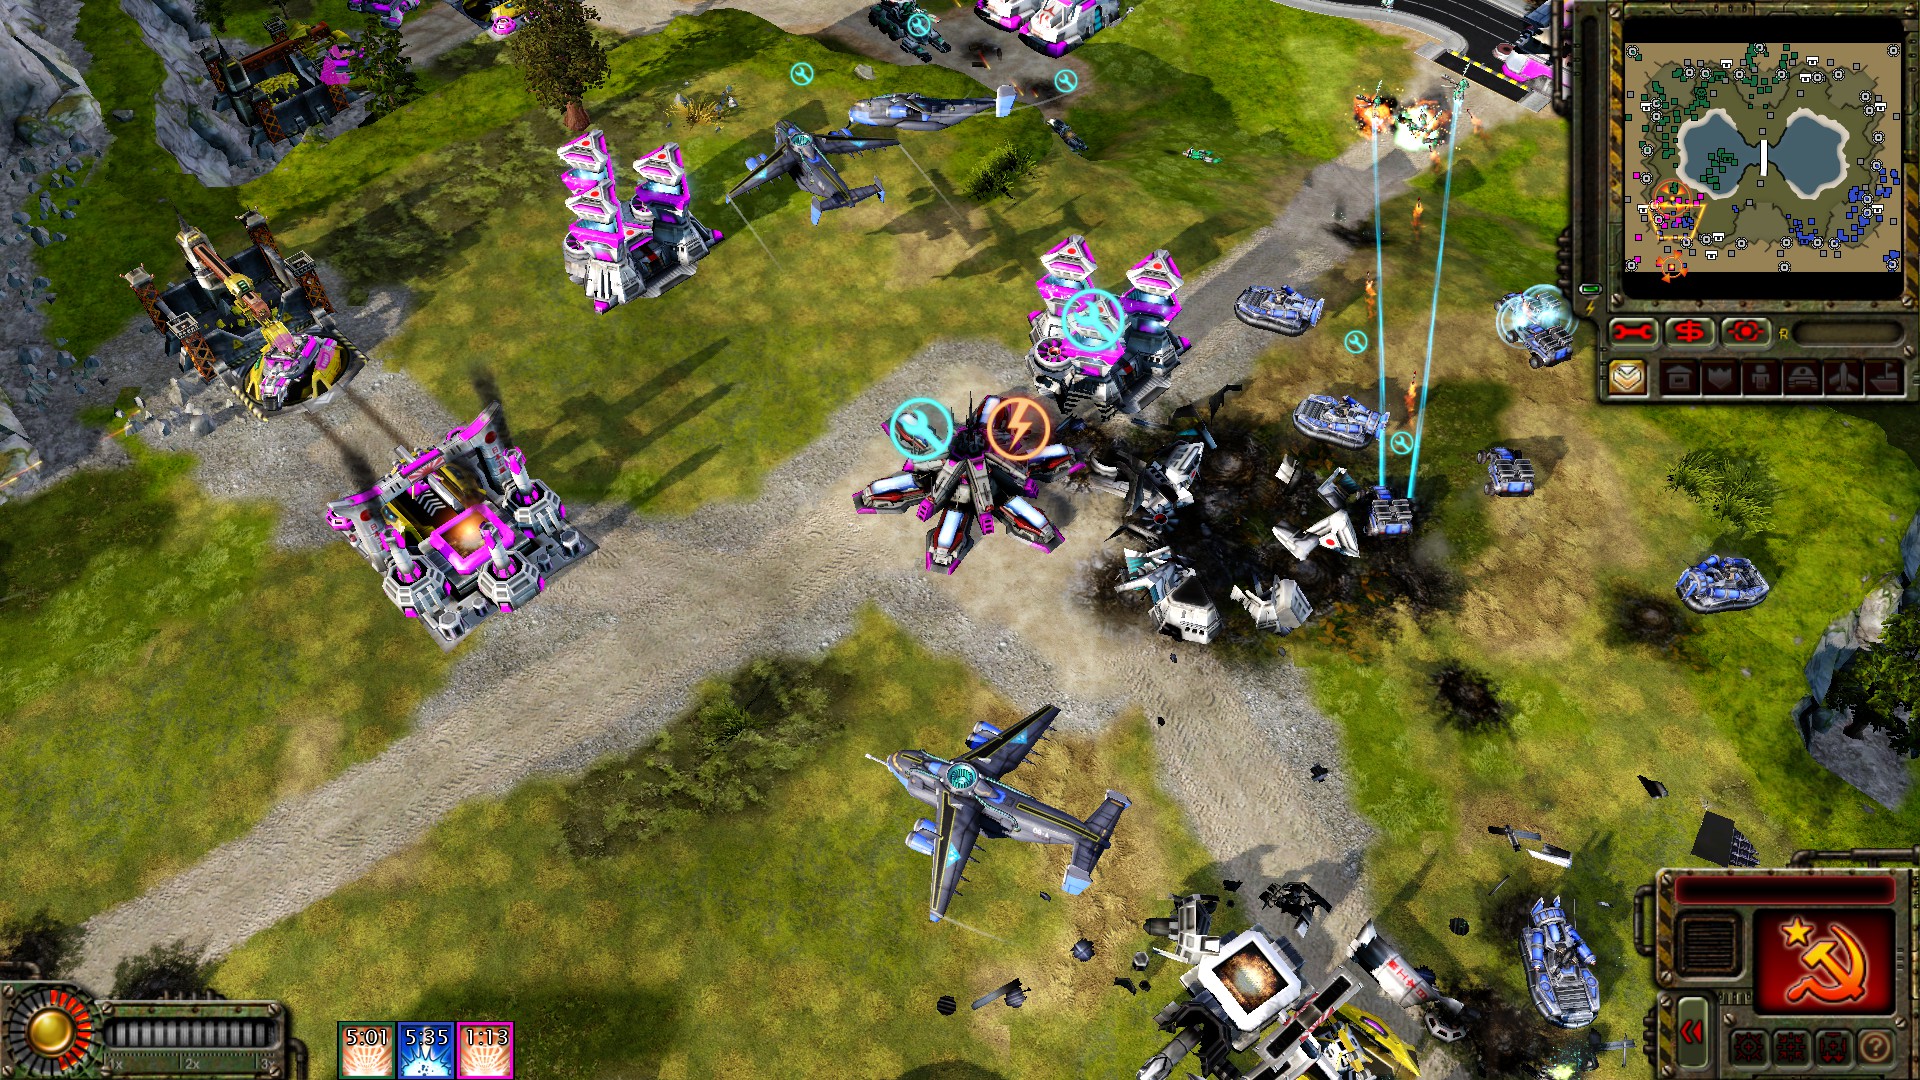 command and conquer red alert 3 uprising